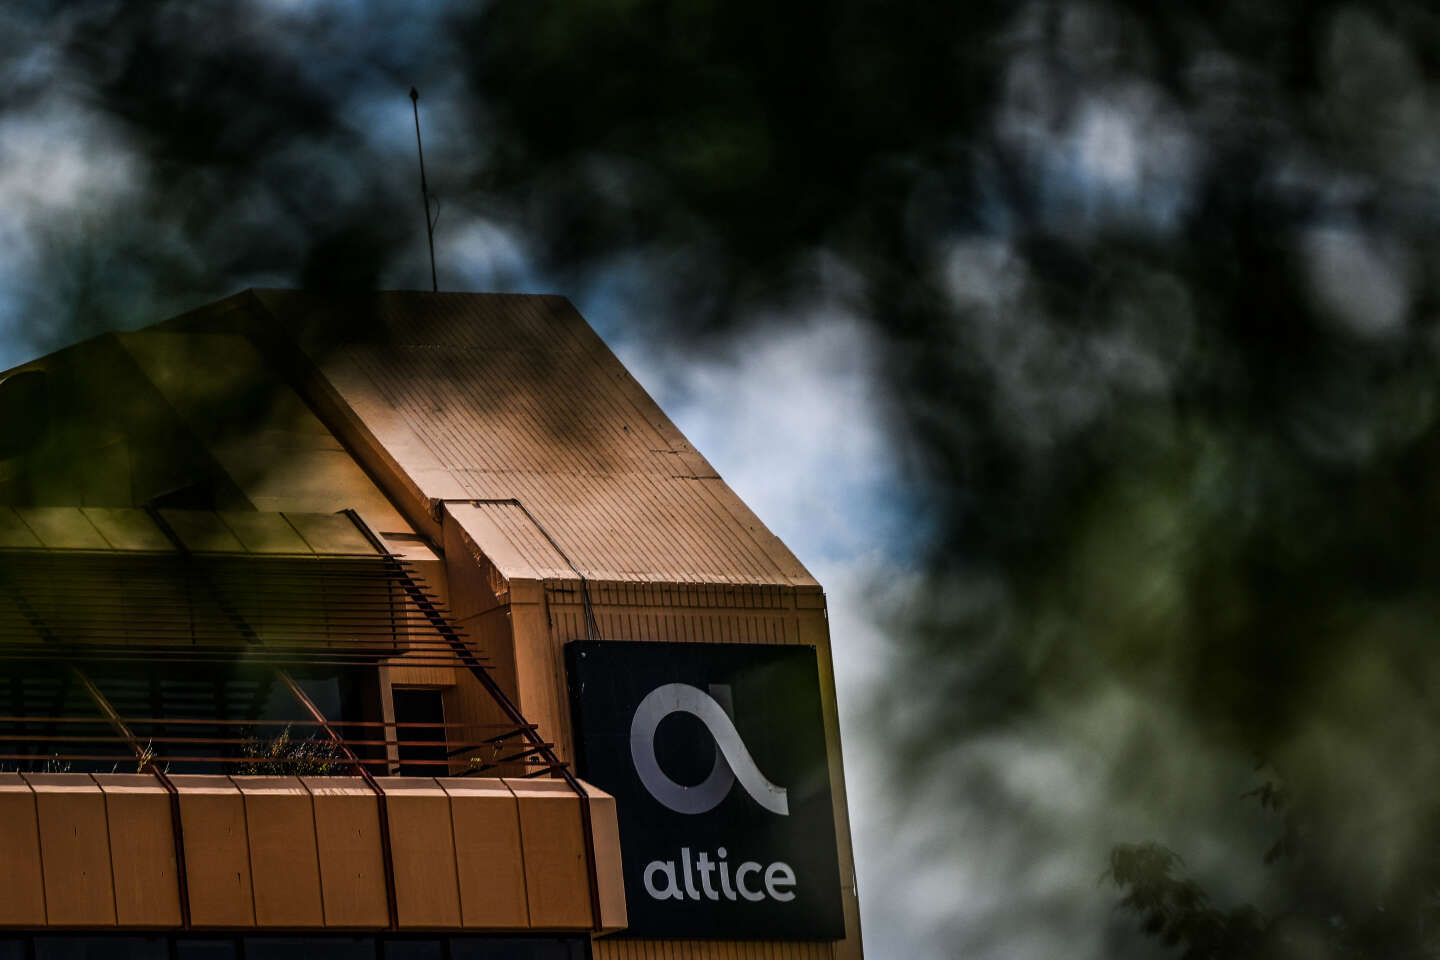 Altice became a civil party in Portugal